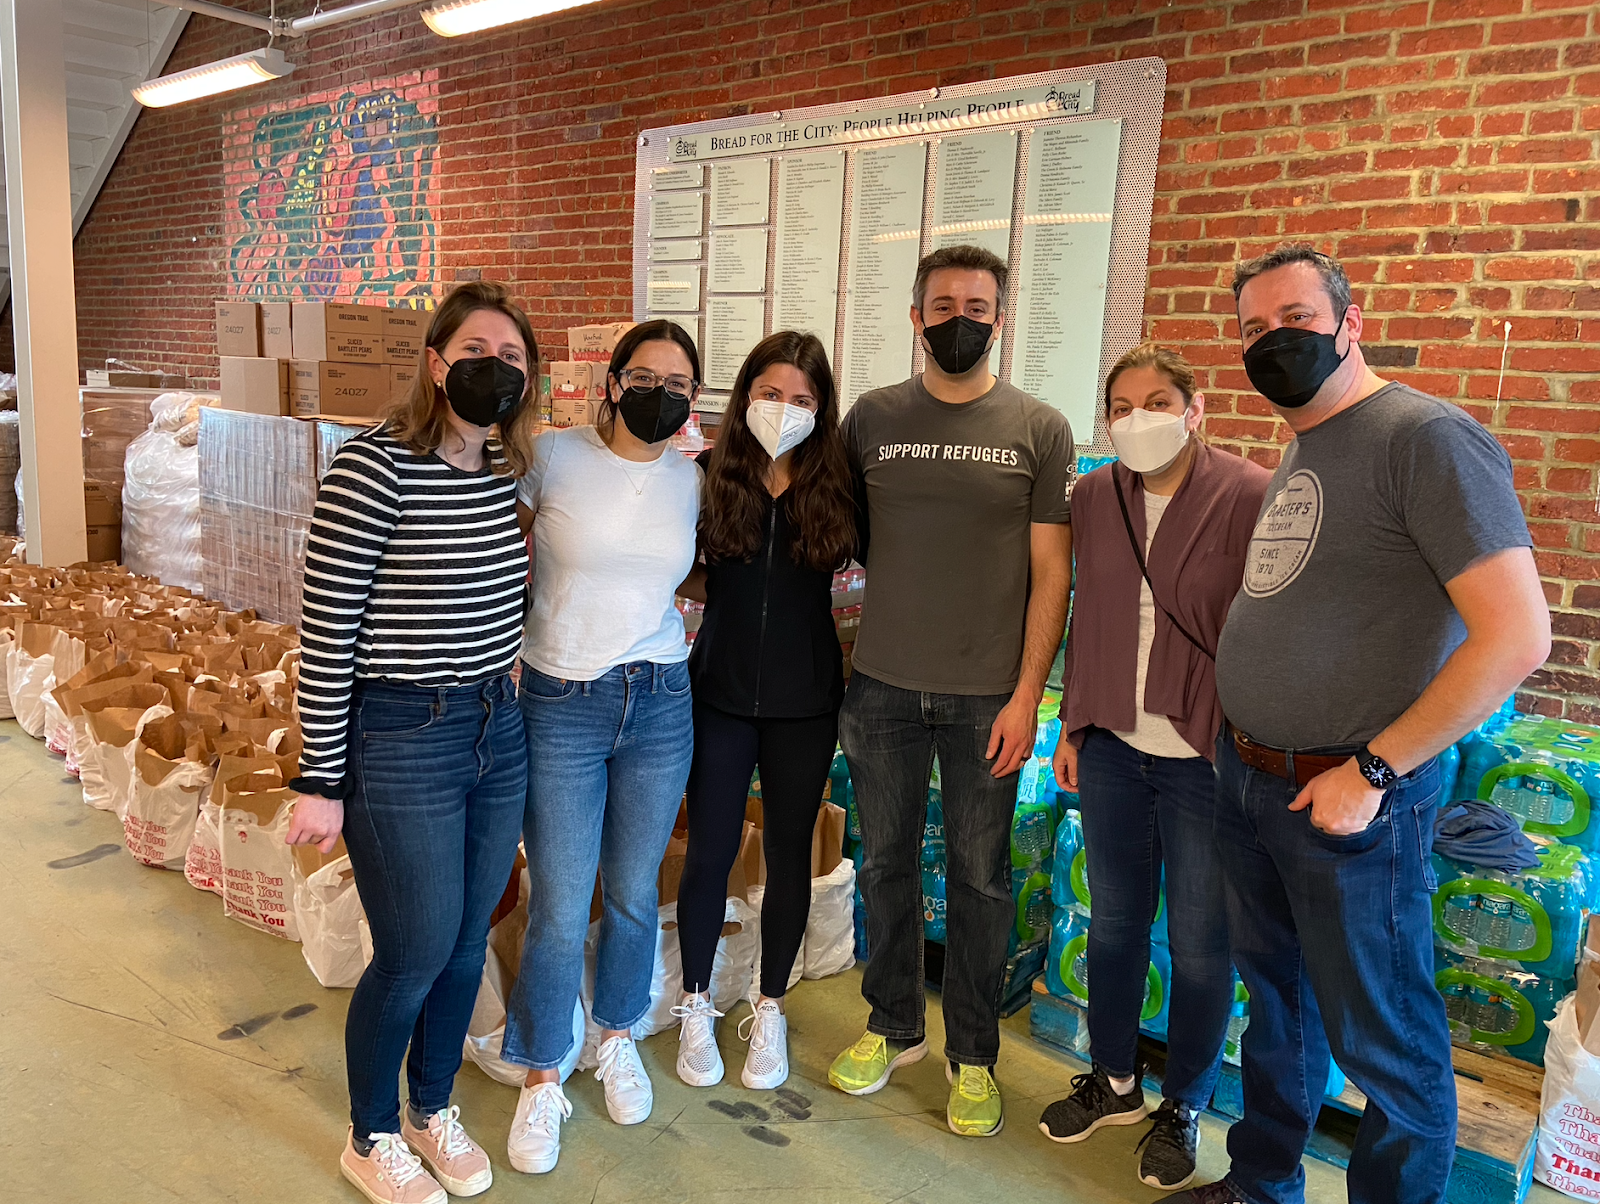 A group of people wearing masks pose in front of an array of bagged meals